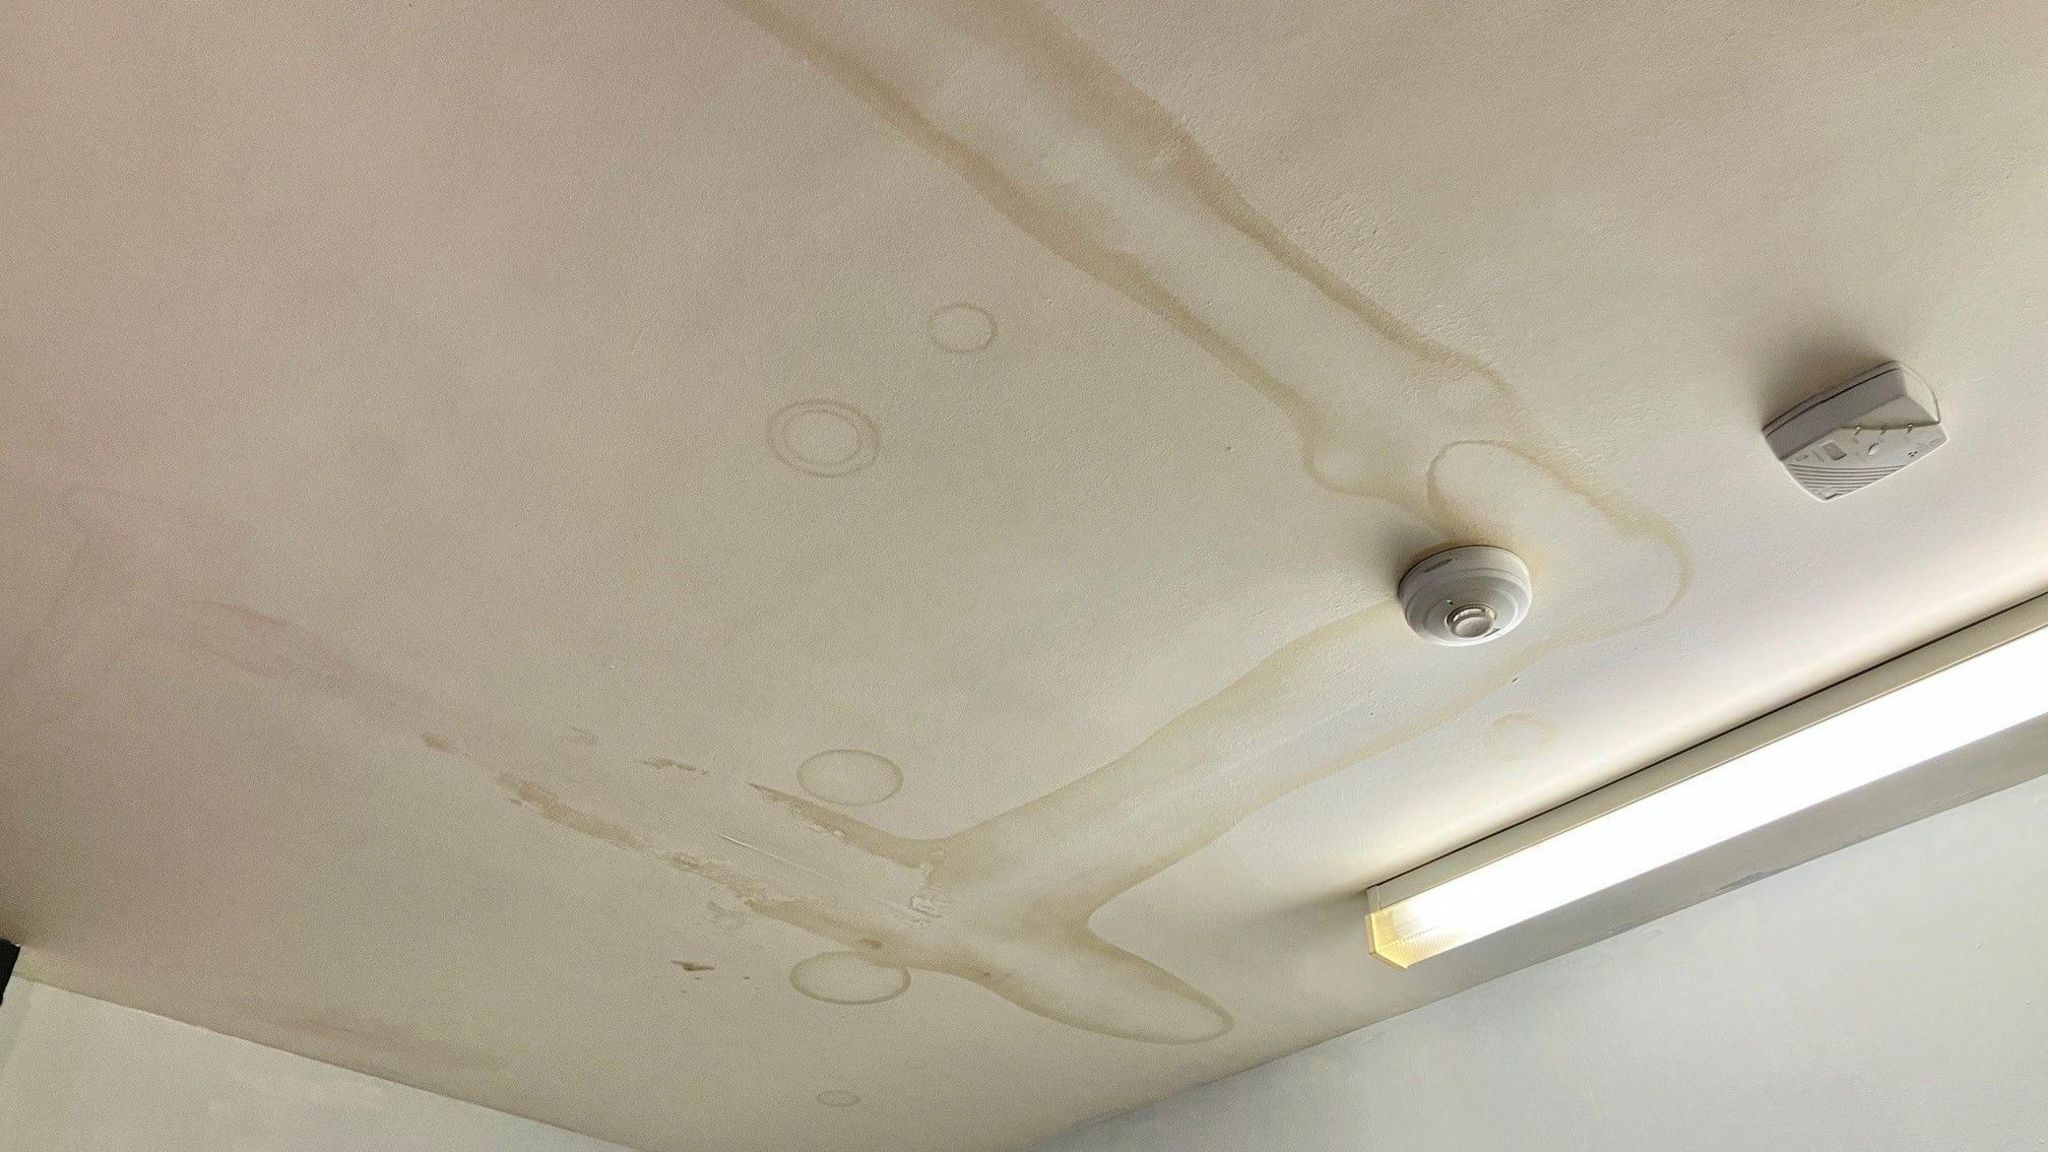 A leak appearing on a kitchen ceiling